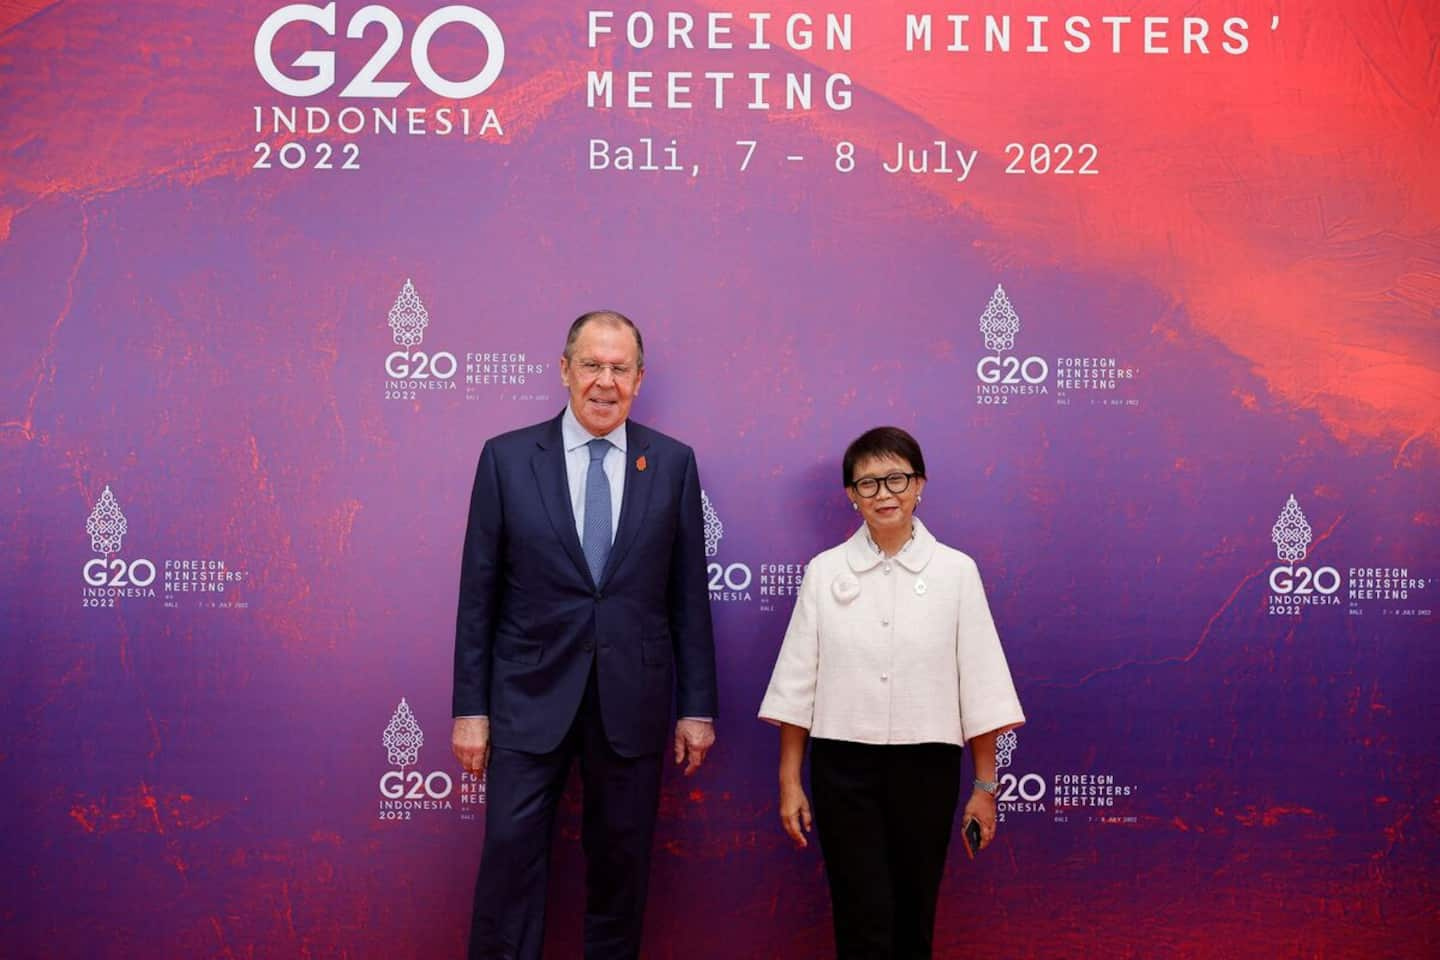 Russia 'won't run' after US for G20 meeting: Lavrov